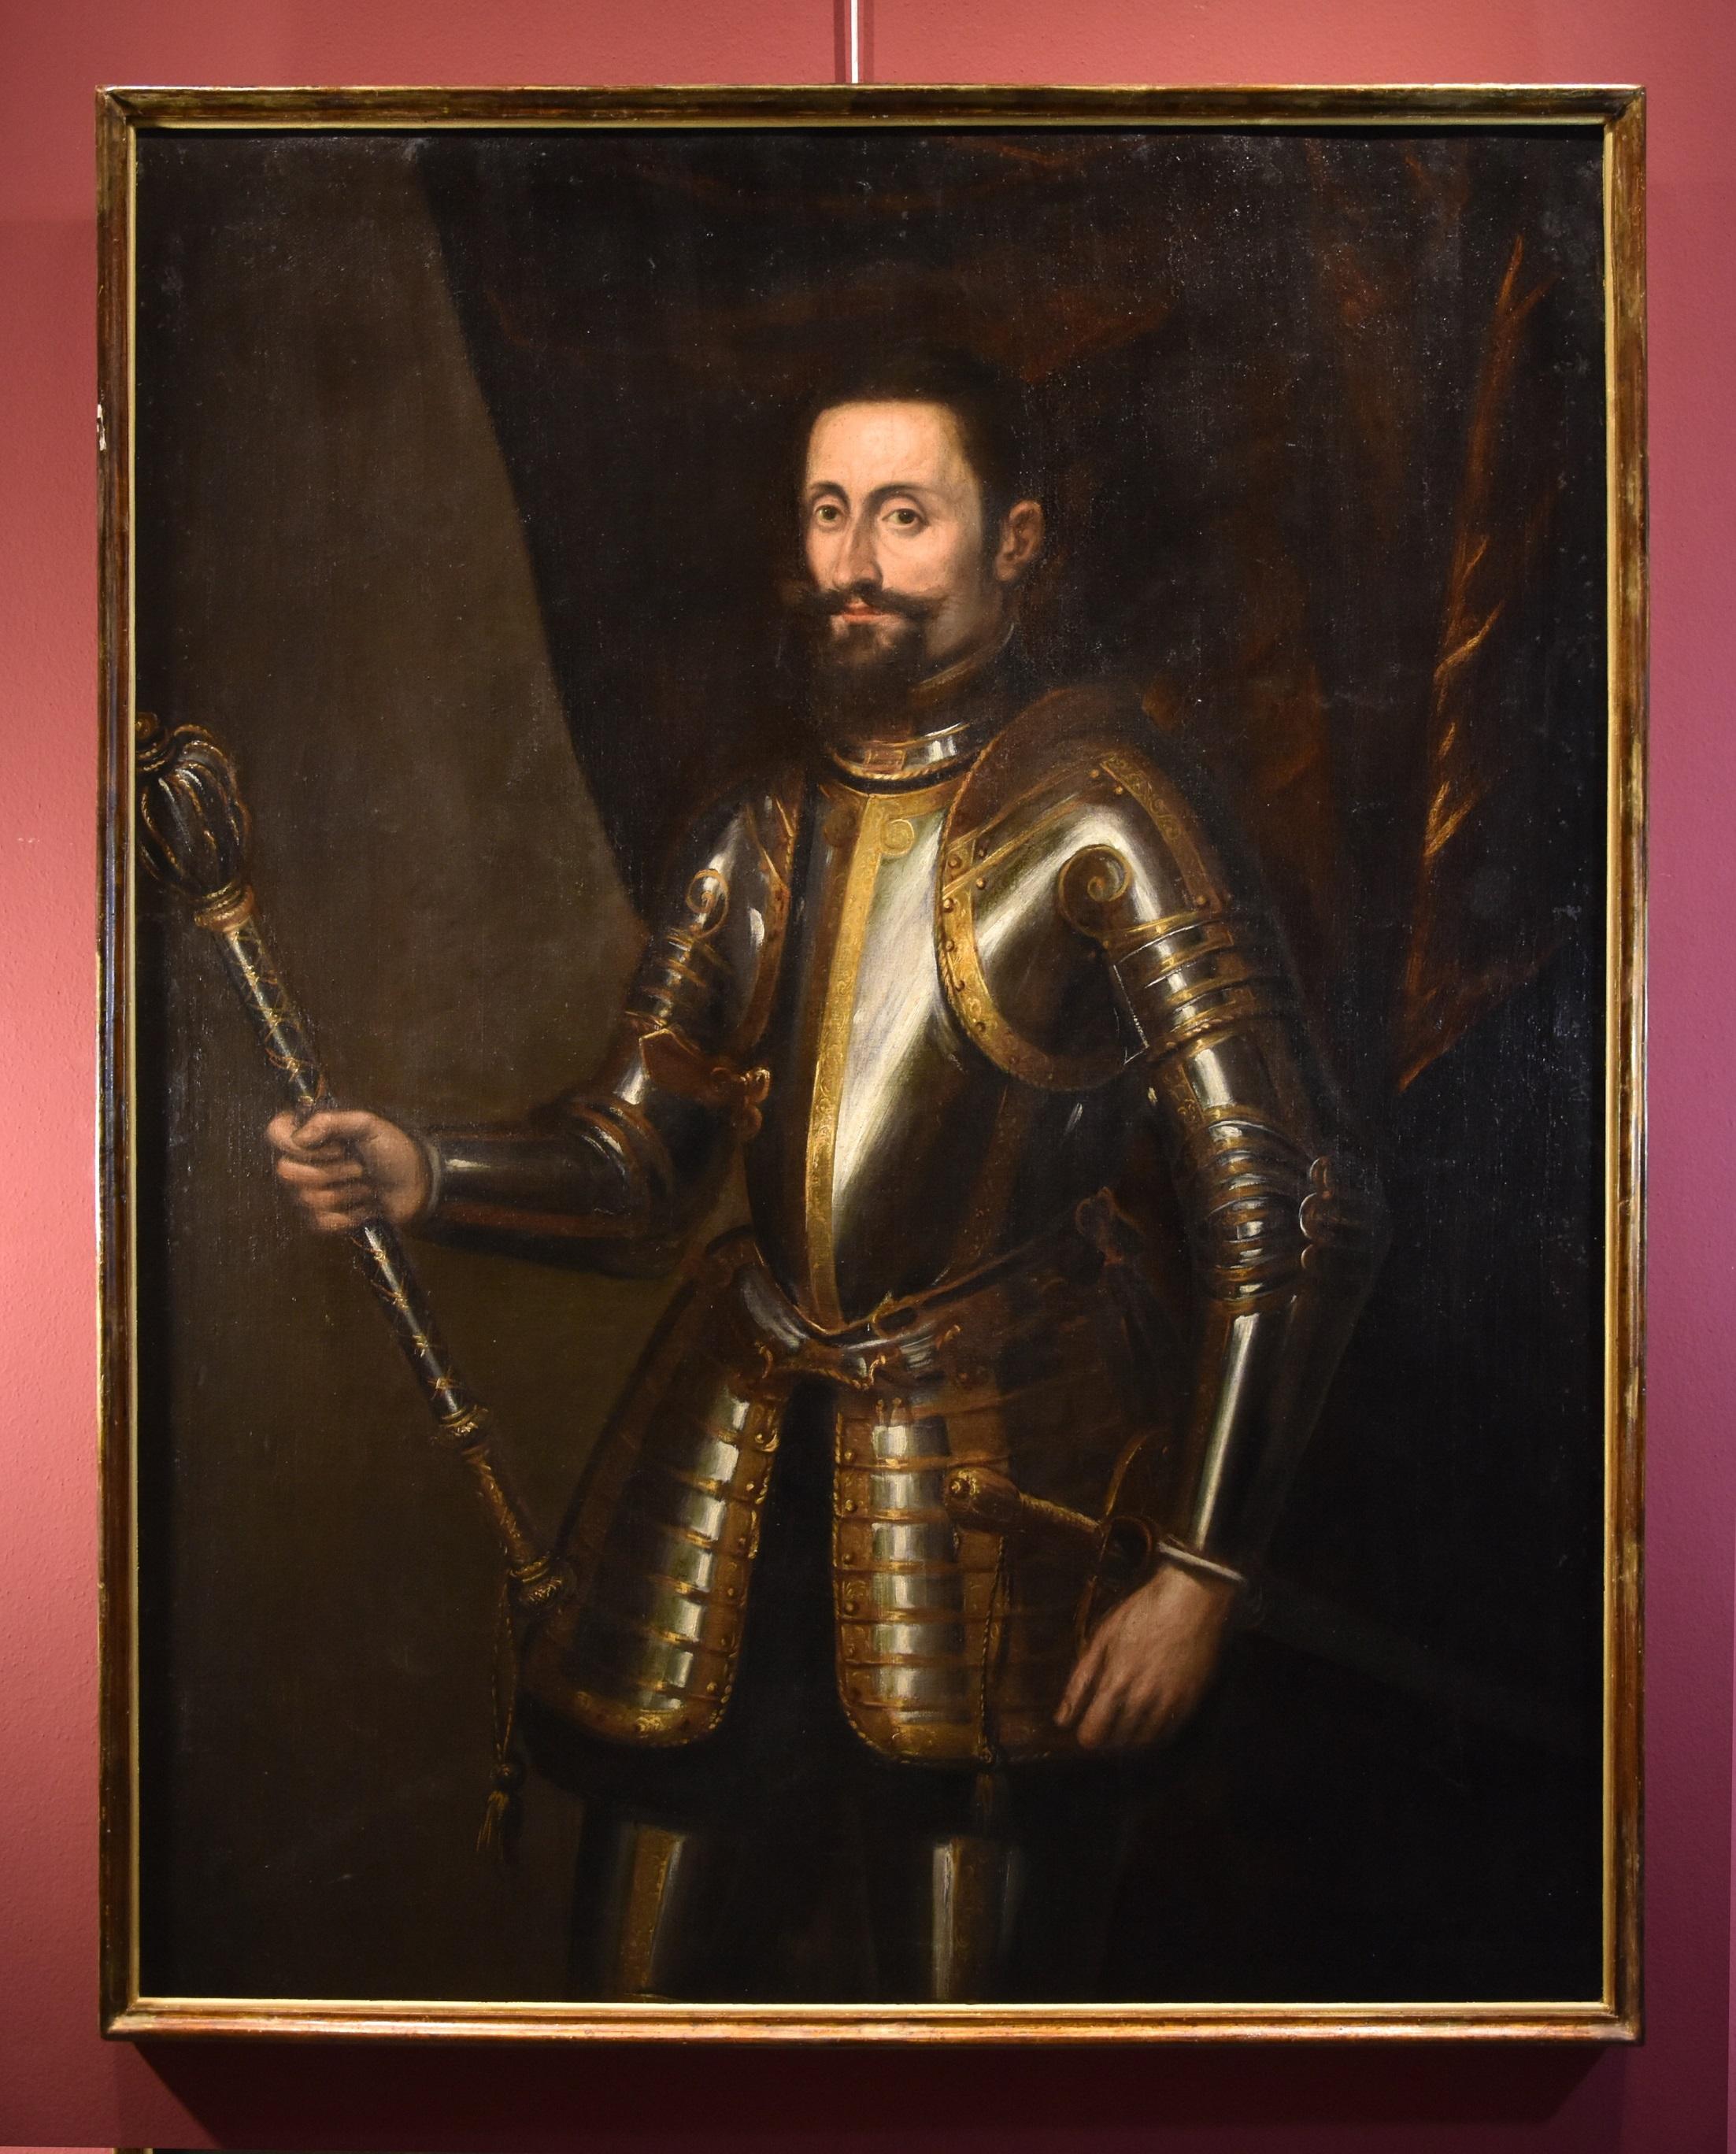 Portrait Knight Armour Titian Paint Oil on canvas Old master 16/17th Century - Painting by Titian painter of the late 16th century